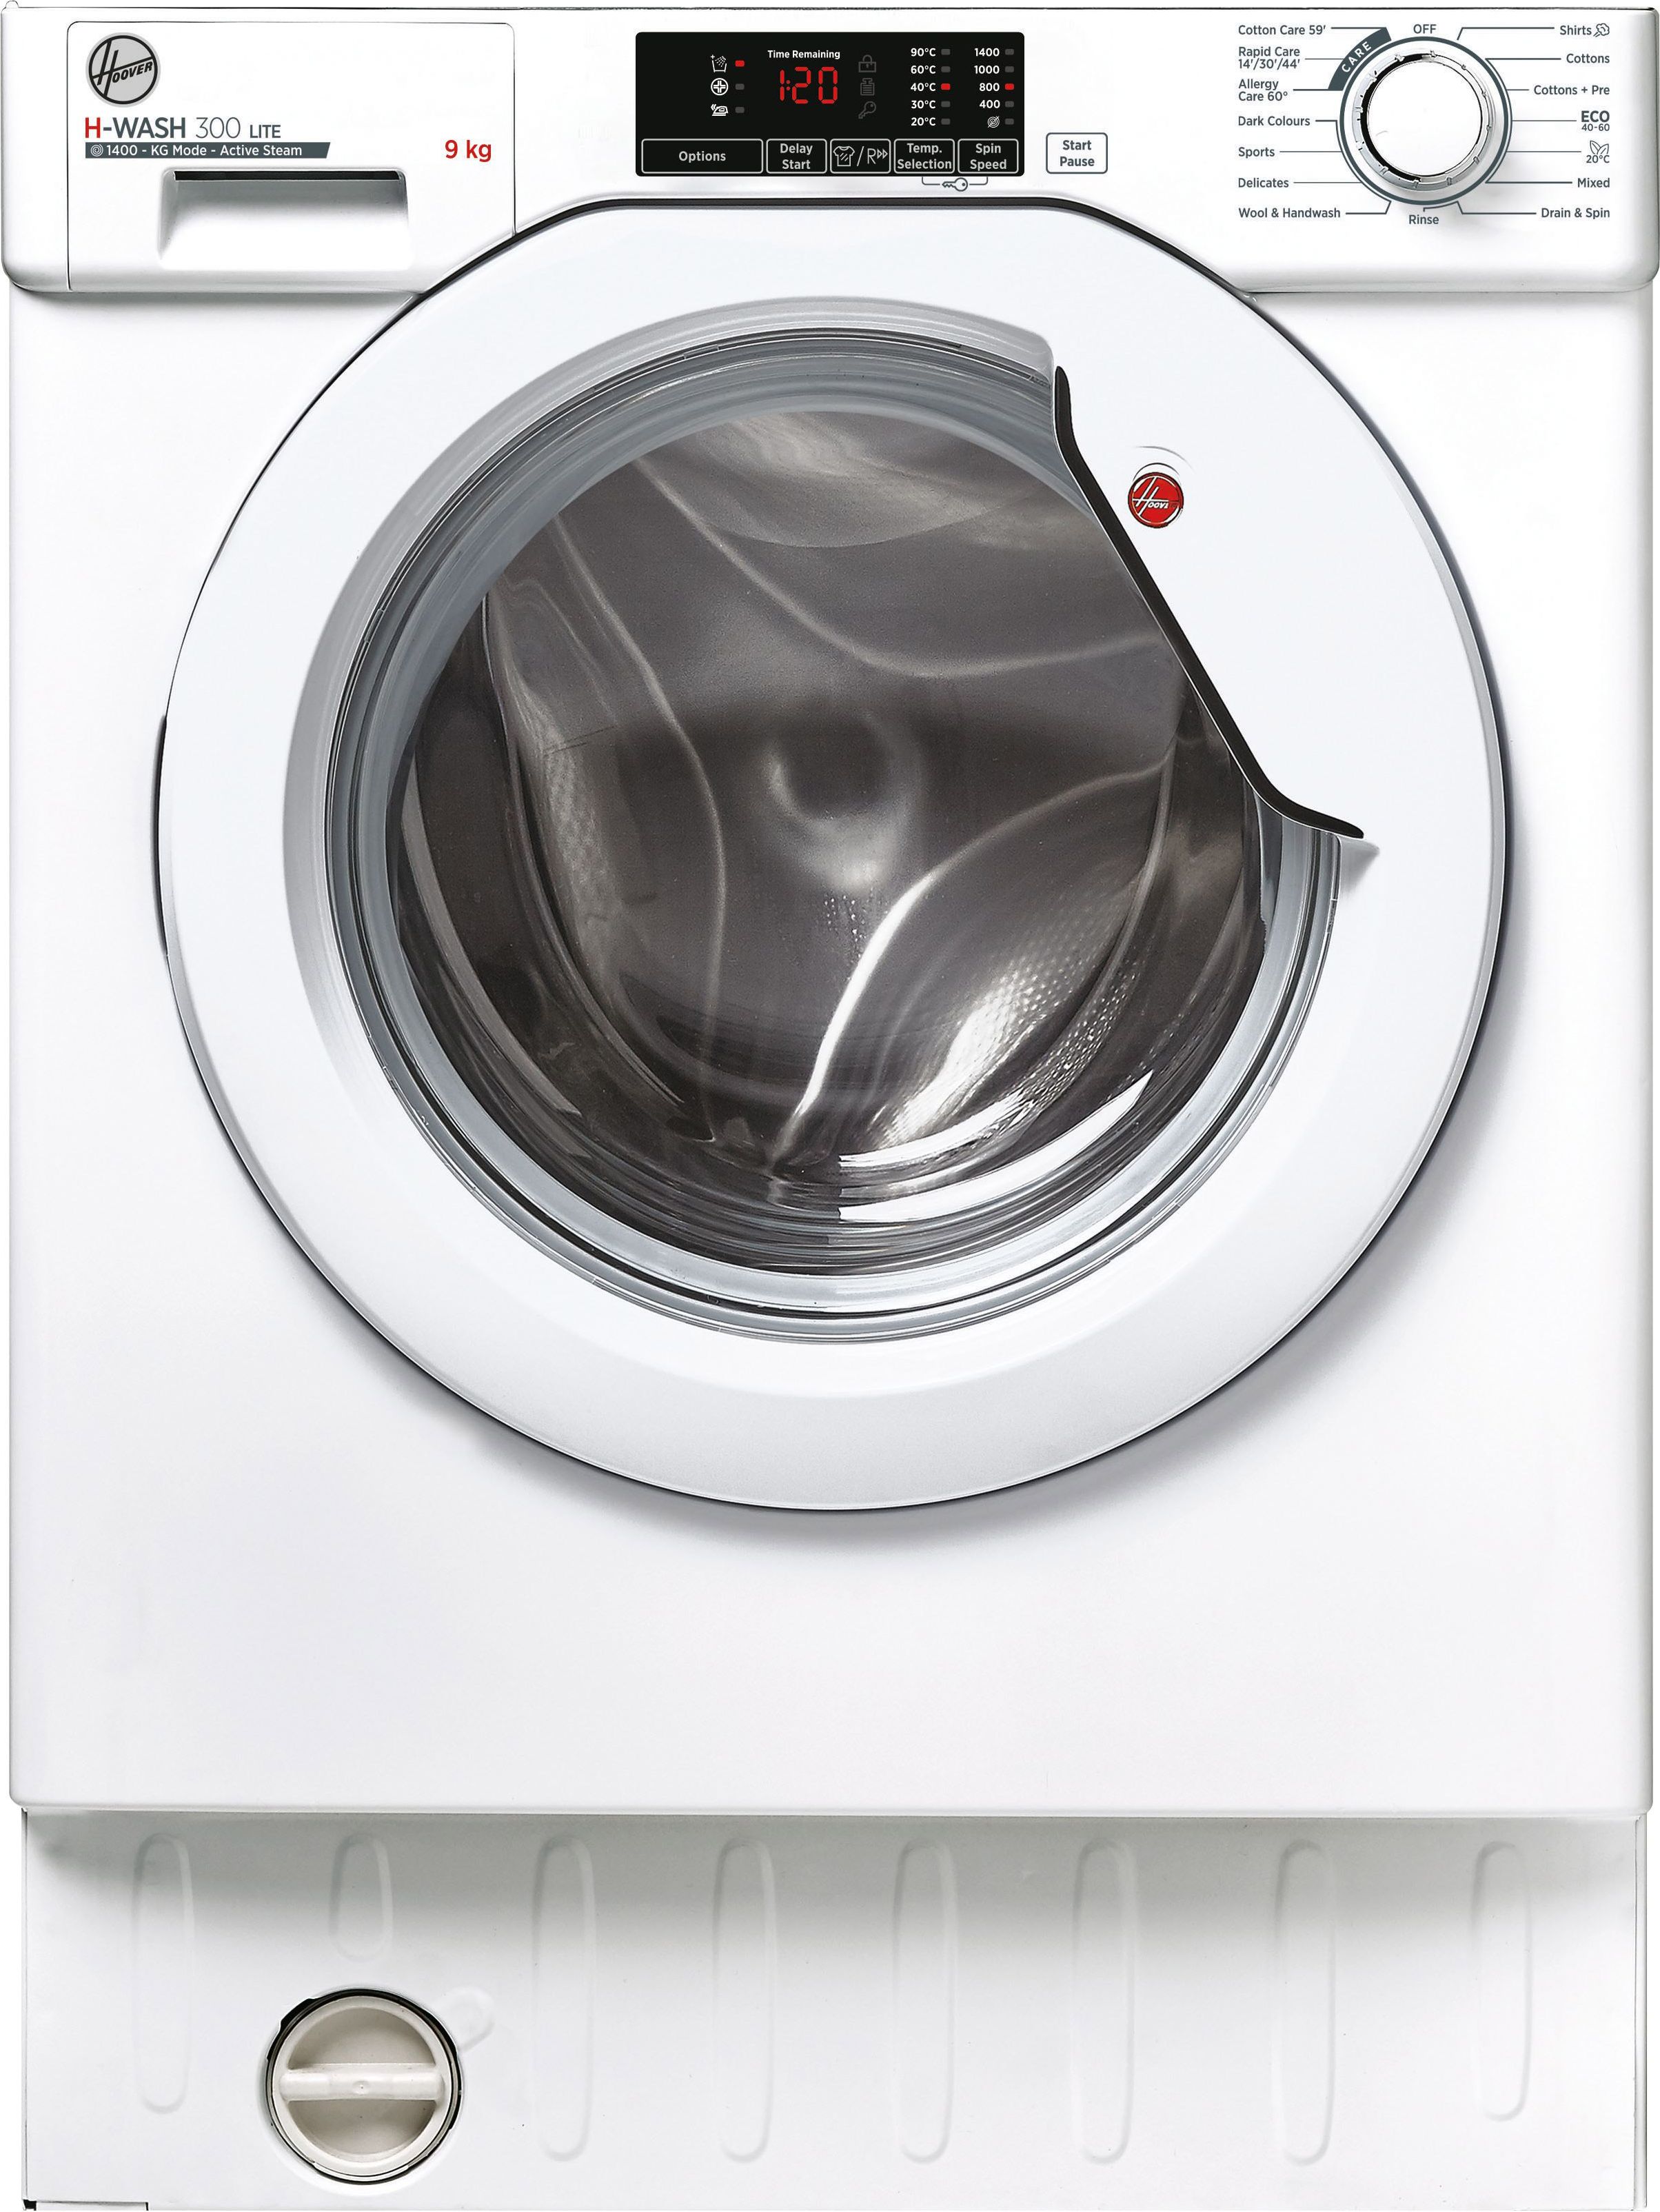 Hoover H-WASH 300 LITE HBWS49D1W4 Integrated 9kg Washing Machine with 1400 rpm - White - B Rated White